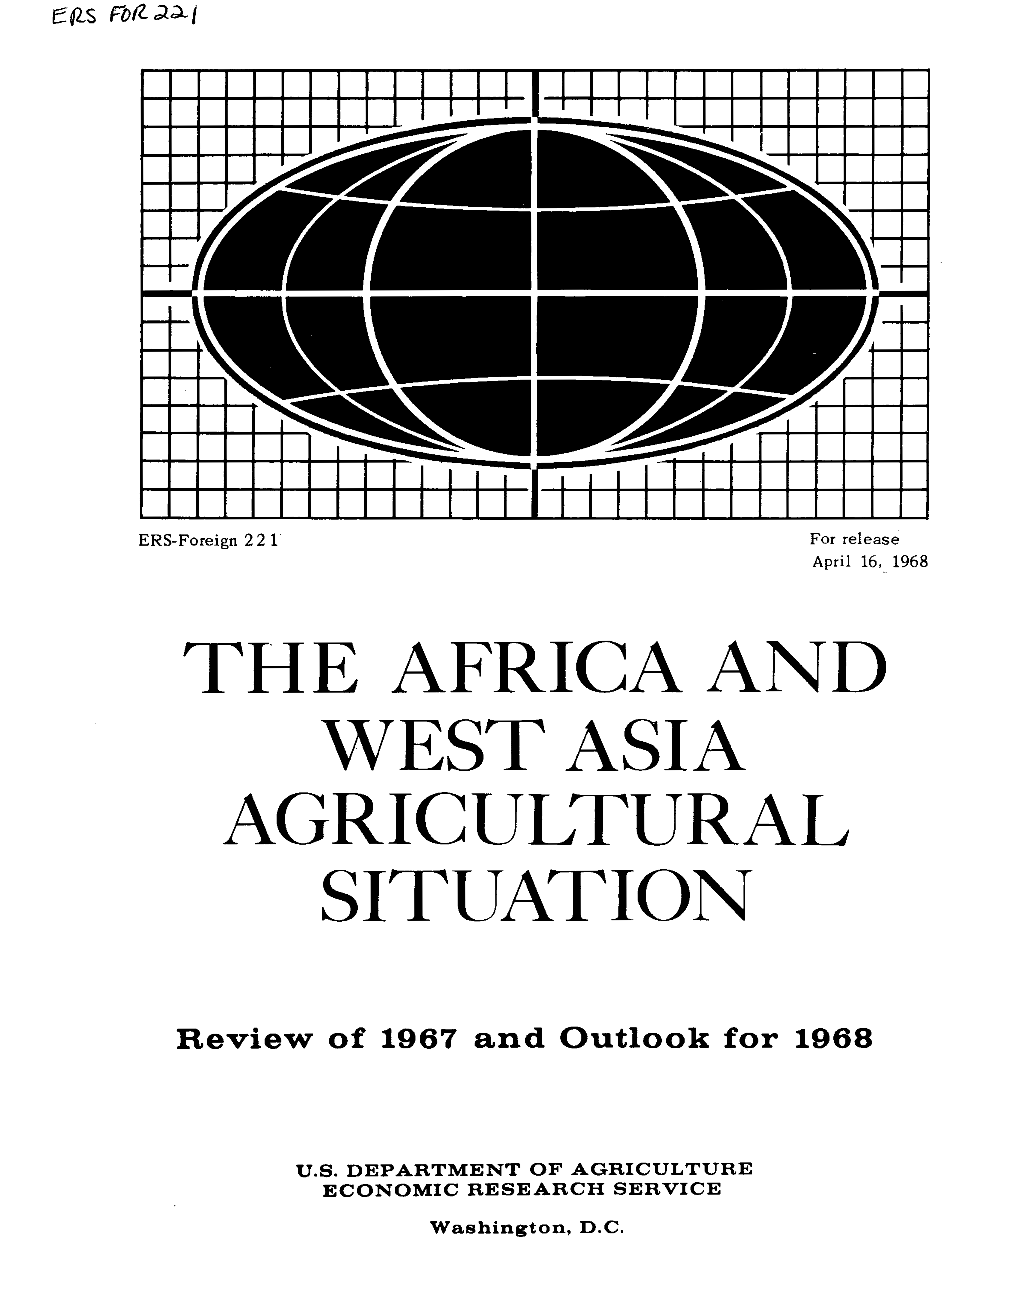 The Africa and West Asia Agricultural Situation